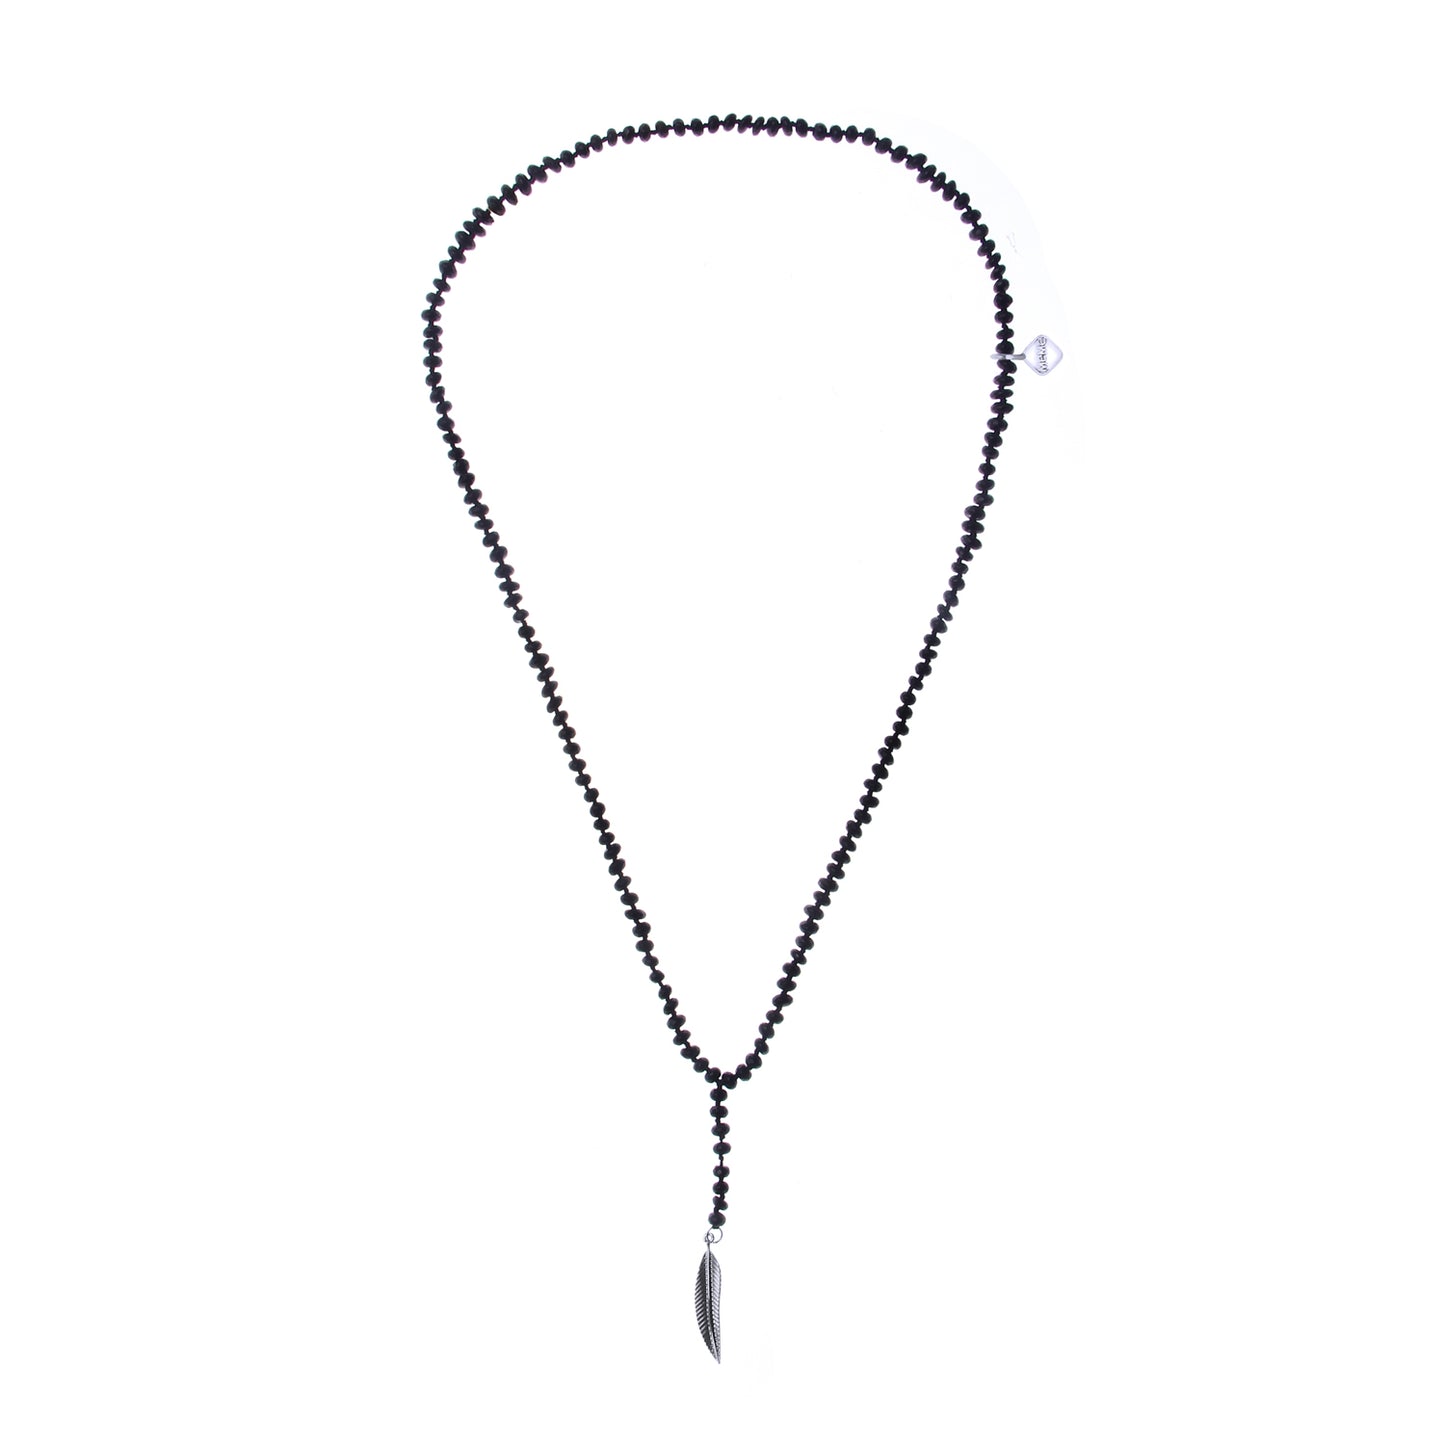 MeMe London Angels Feather Necklace - Black with white gold